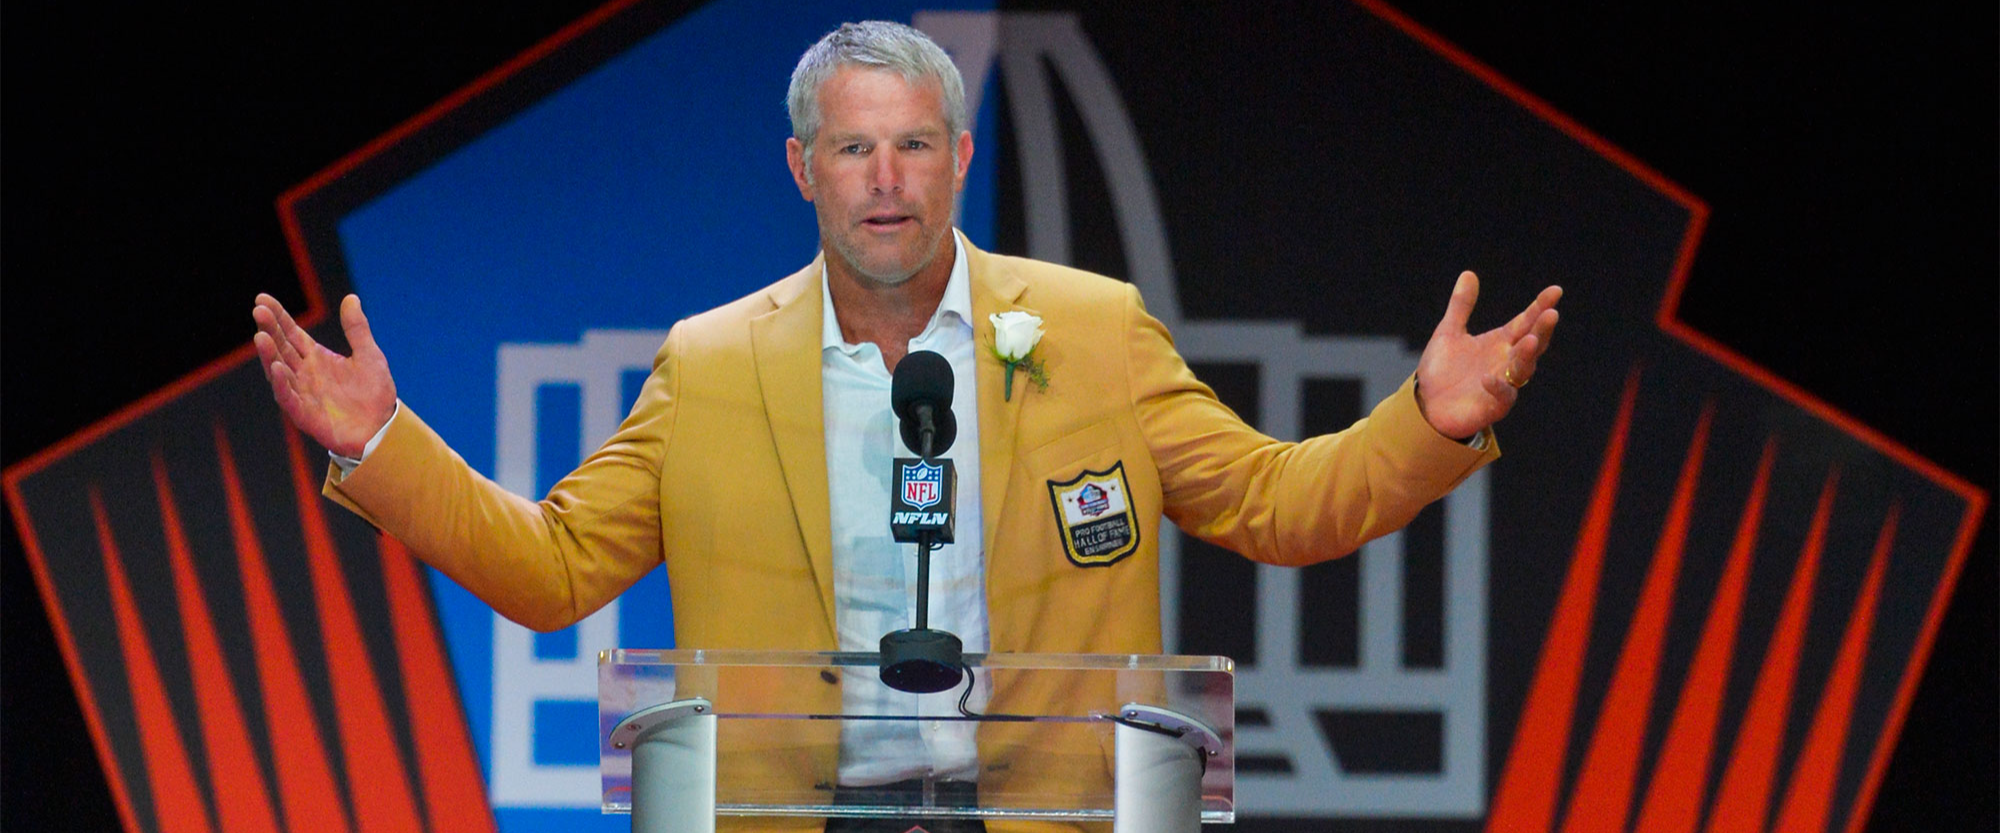 Brett Favre HELPS STEAL from the poor to give to the WEALTHY with MISSISSIPPI WELFARE SCANDAL!